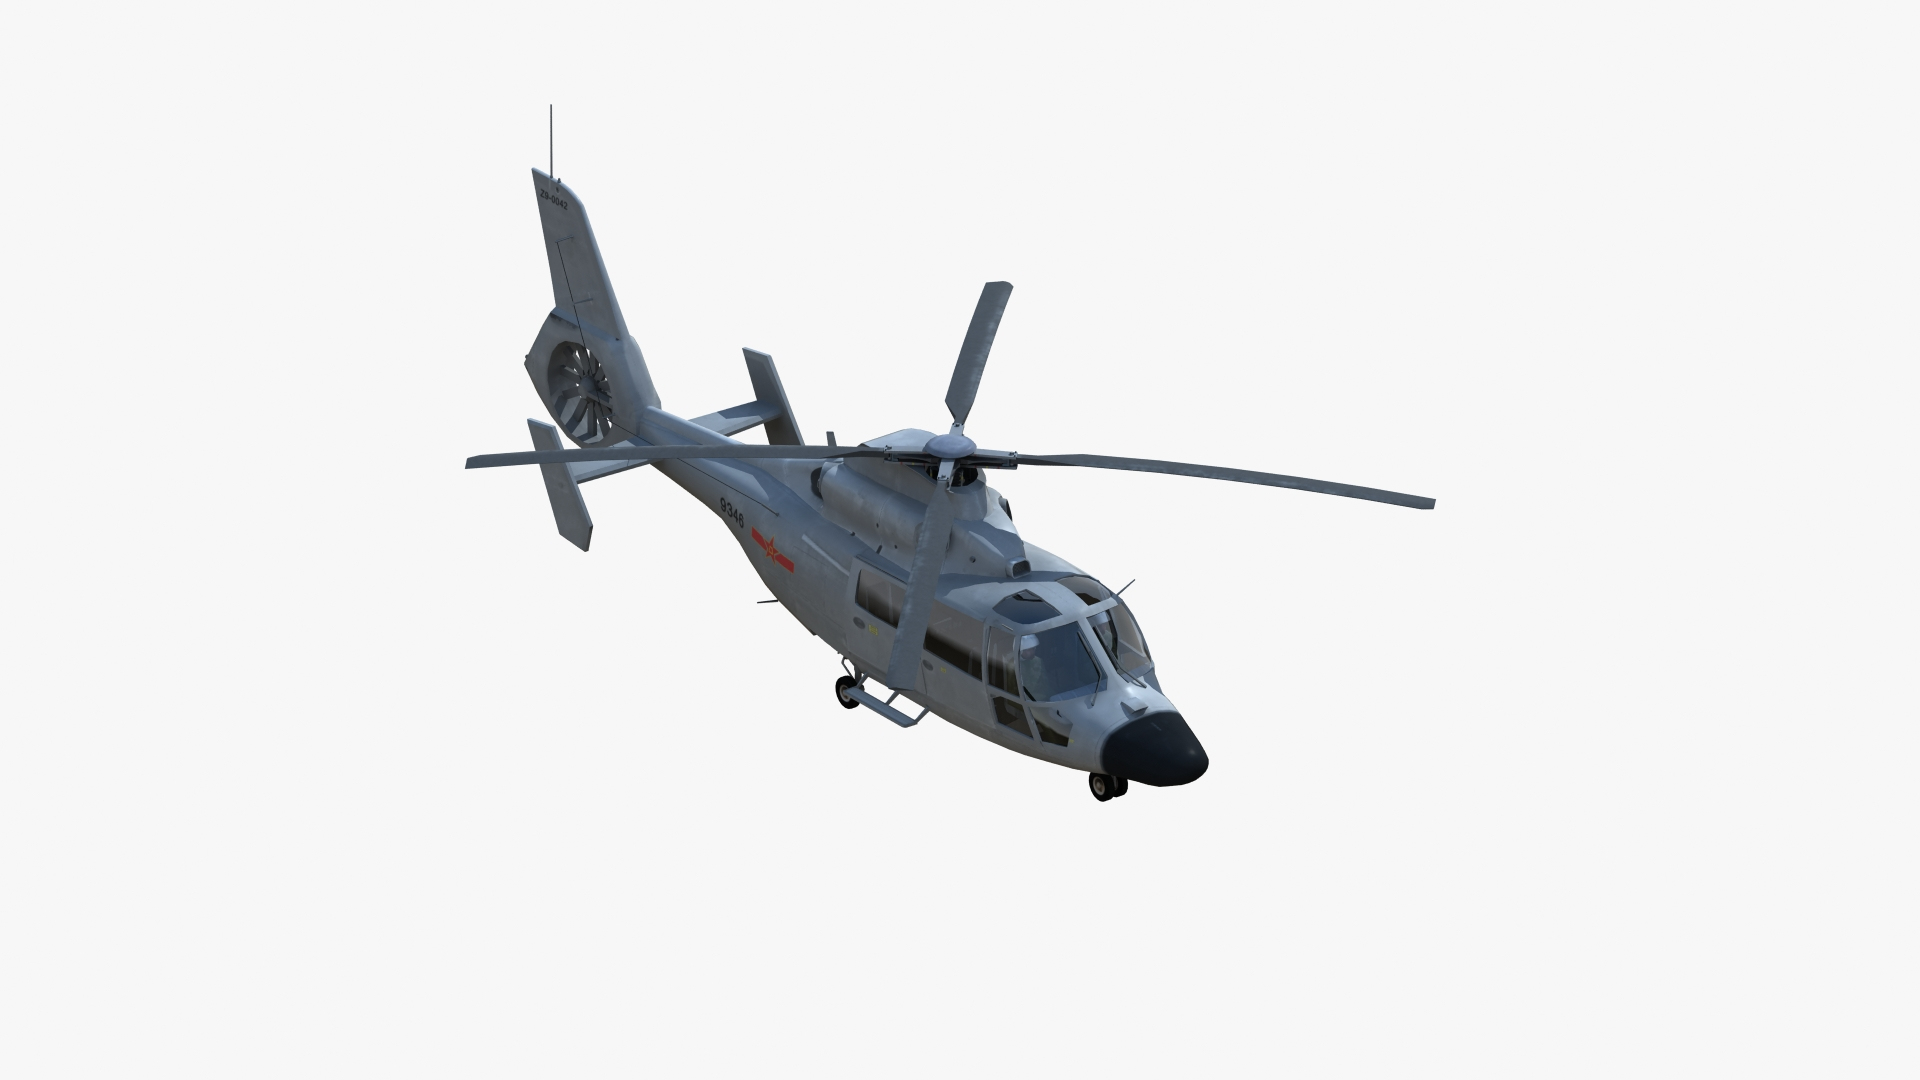 chinese military helicopters model https://p.turbosquid.com/ts-thumb/ui/KysFxp/Nst4MvFo/z9c_tt/jpg/1593255258/1920x1080/turn_fit_q99/7073b4f6ee330496dfc73e1a74992535cc28e120/z9c_tt-1.jpg